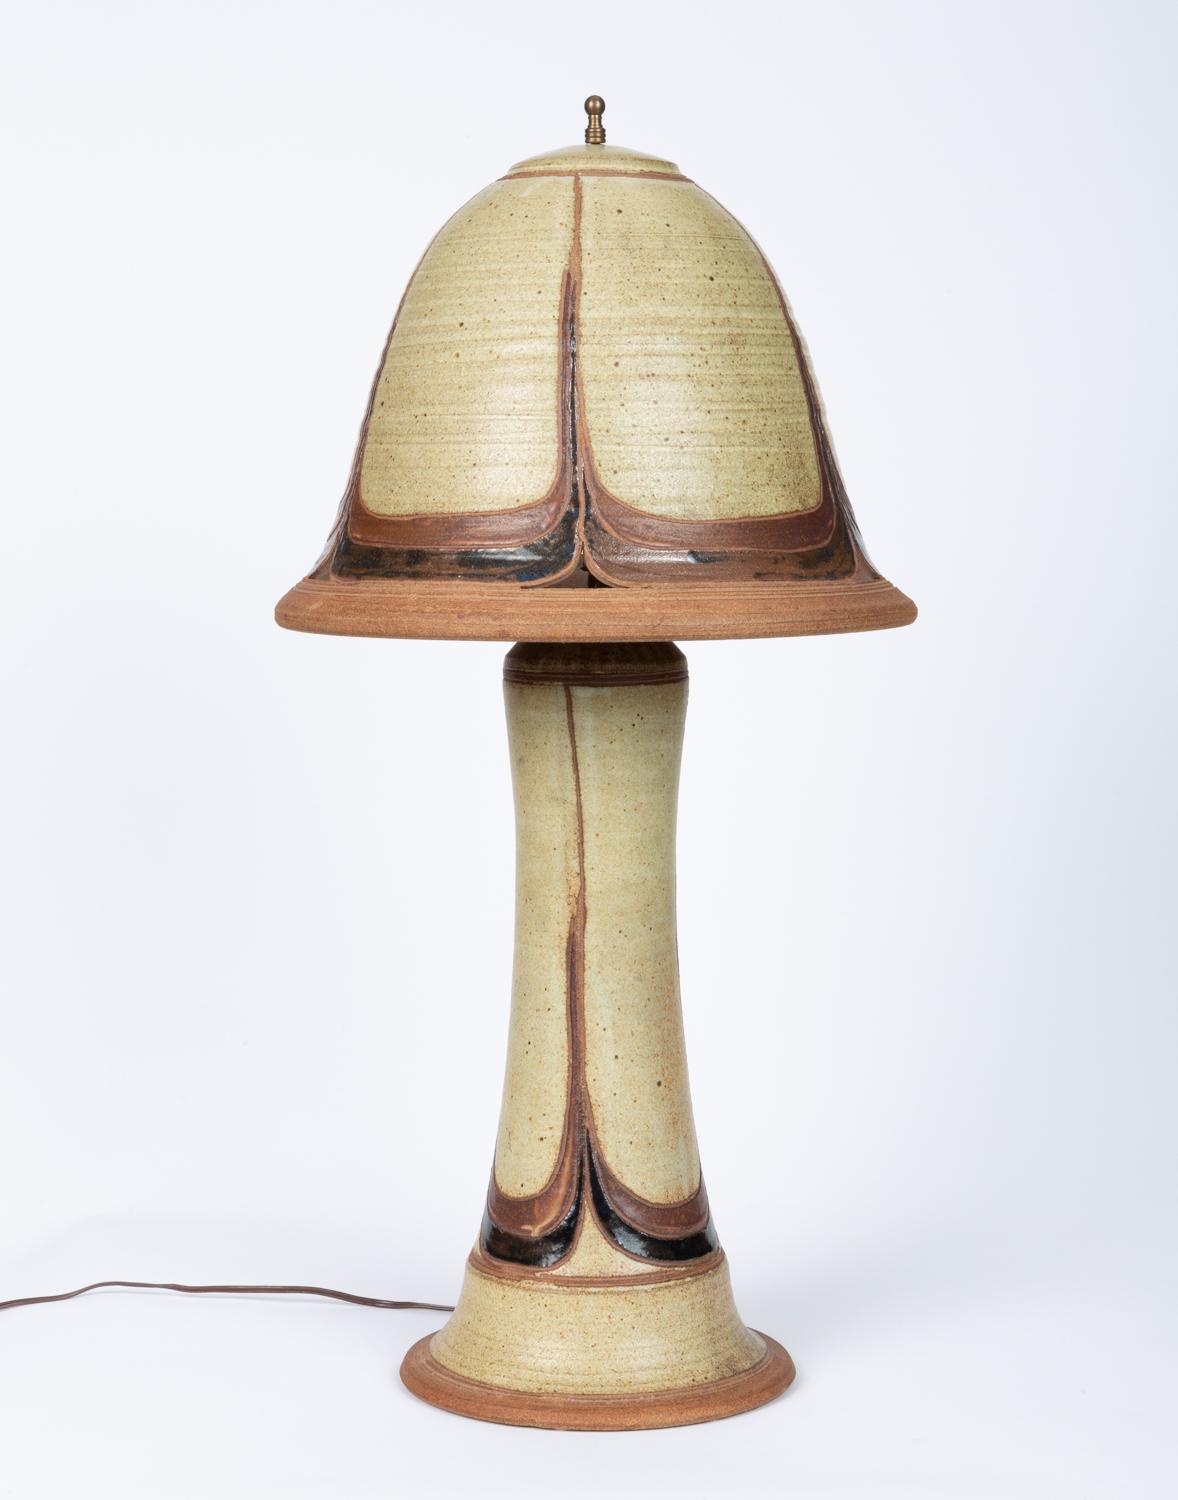 This studio lamp is like a scene in a Lewis Carroll book come to life. Made of stoneware clay and finished in stone matte glaze with brown and black glaze marble detailing along the base of the lamp and the edge of the shade. Neutral color scheme